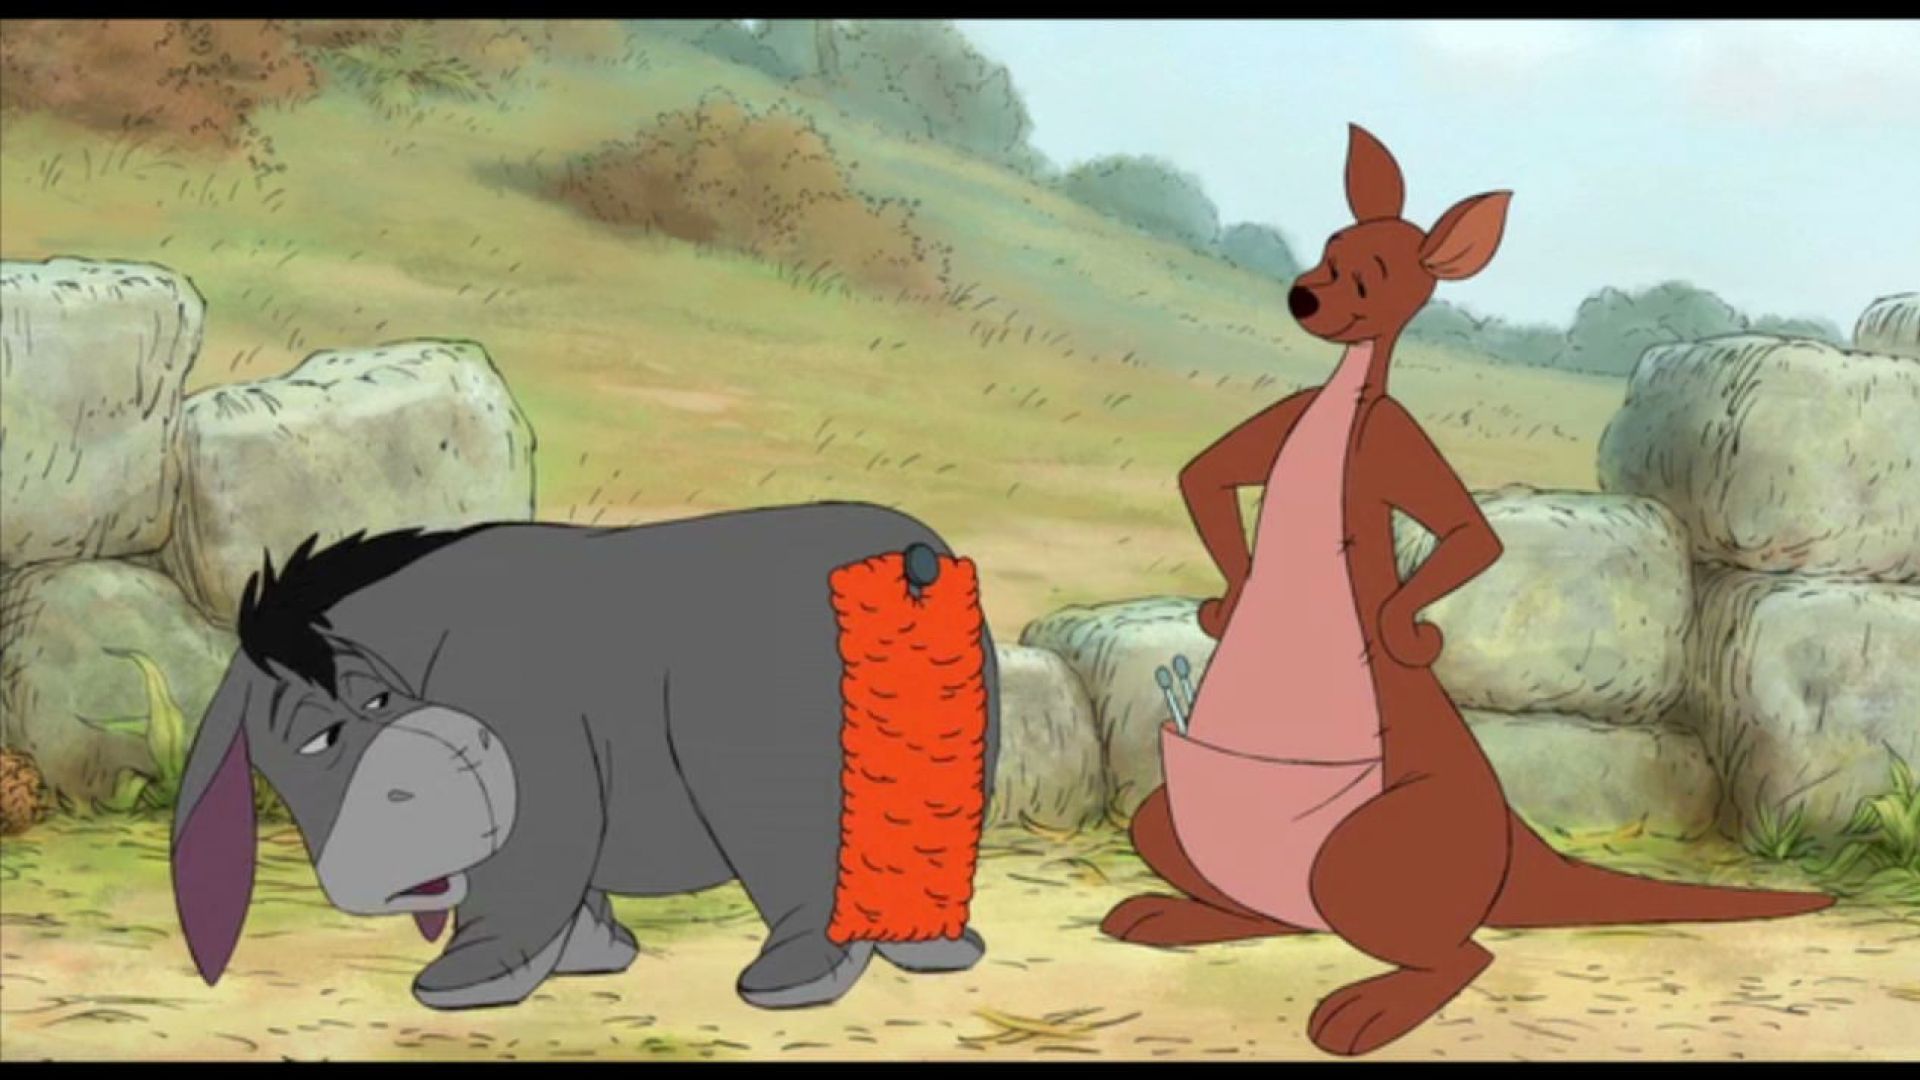 Eeyore gets a new tail in Winnie the Pooh